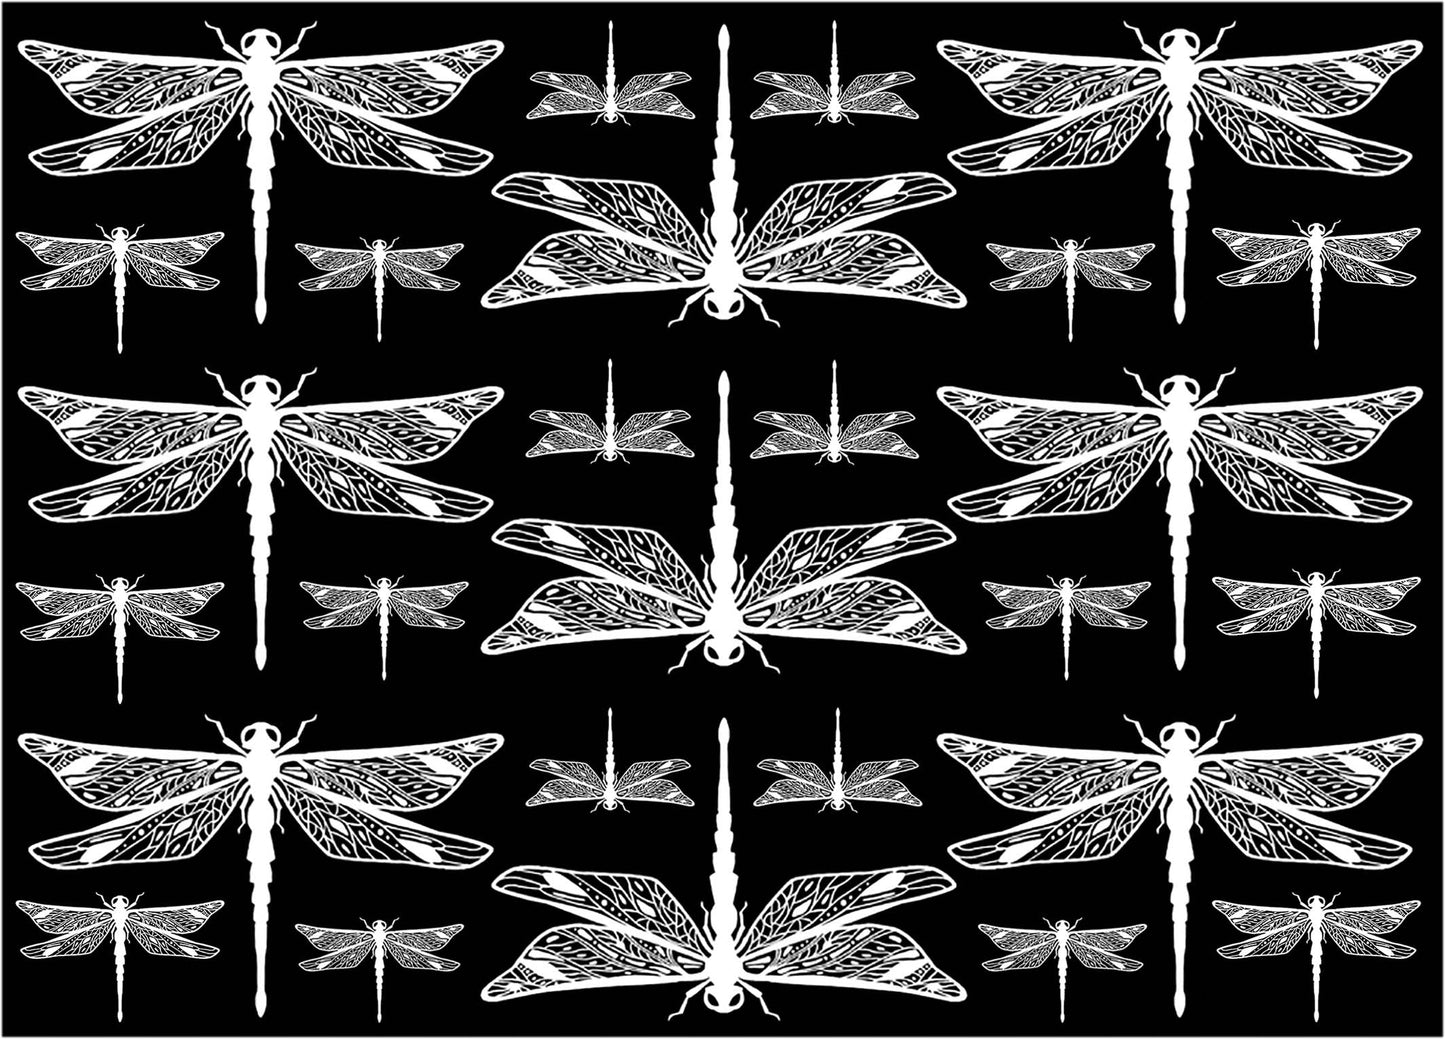 Dragonflies 27 pcs 7/8" to 2-1/2" White Fused Glass Decals